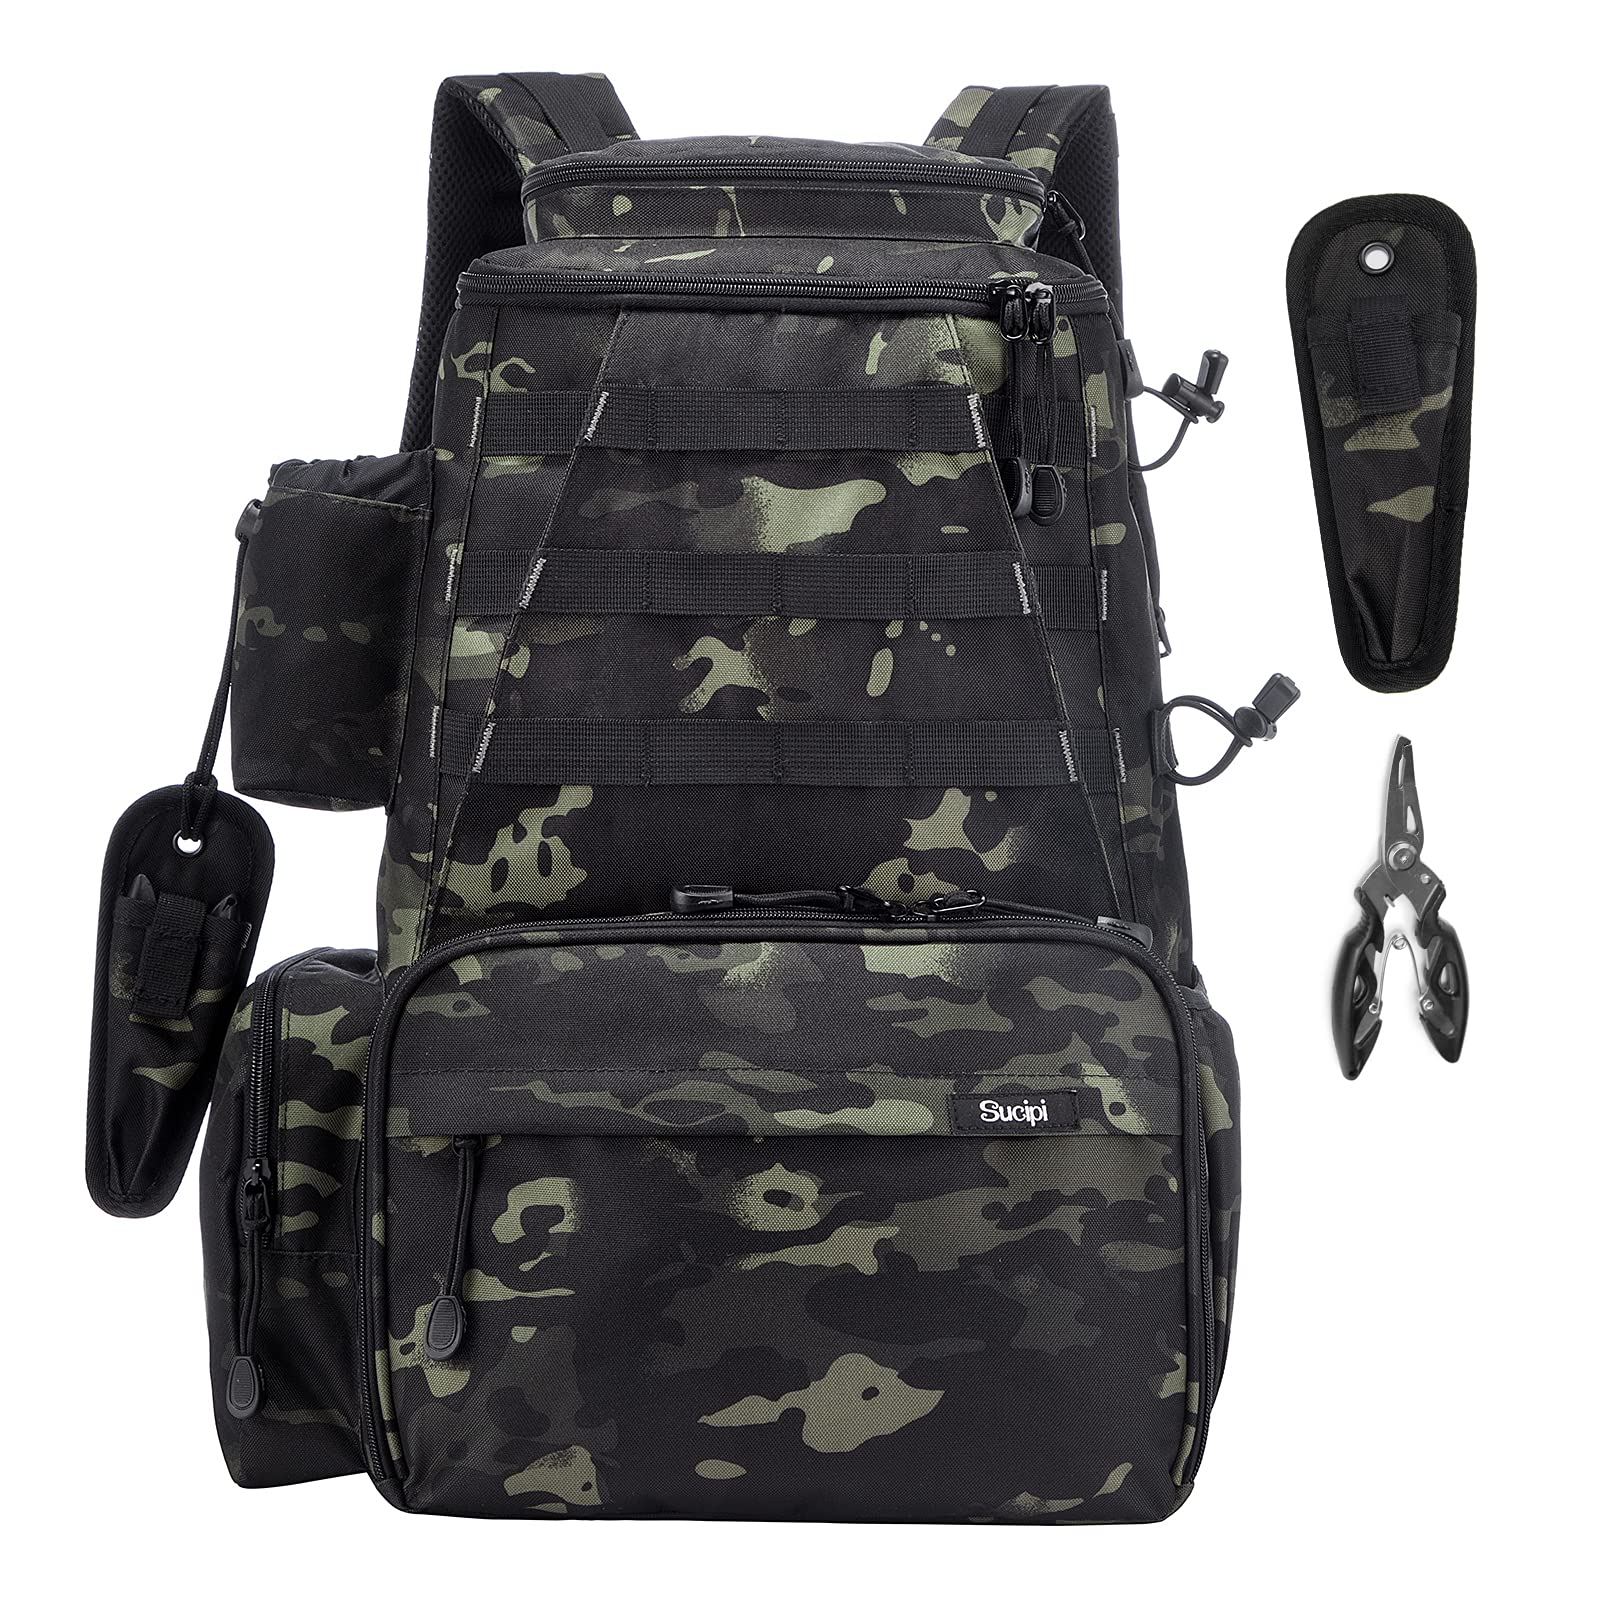 Camouflage Lure Fishing Bags Multi-functional Backpack Outdoor Sports Large  Capacity Rod Fishing Tackle Bag